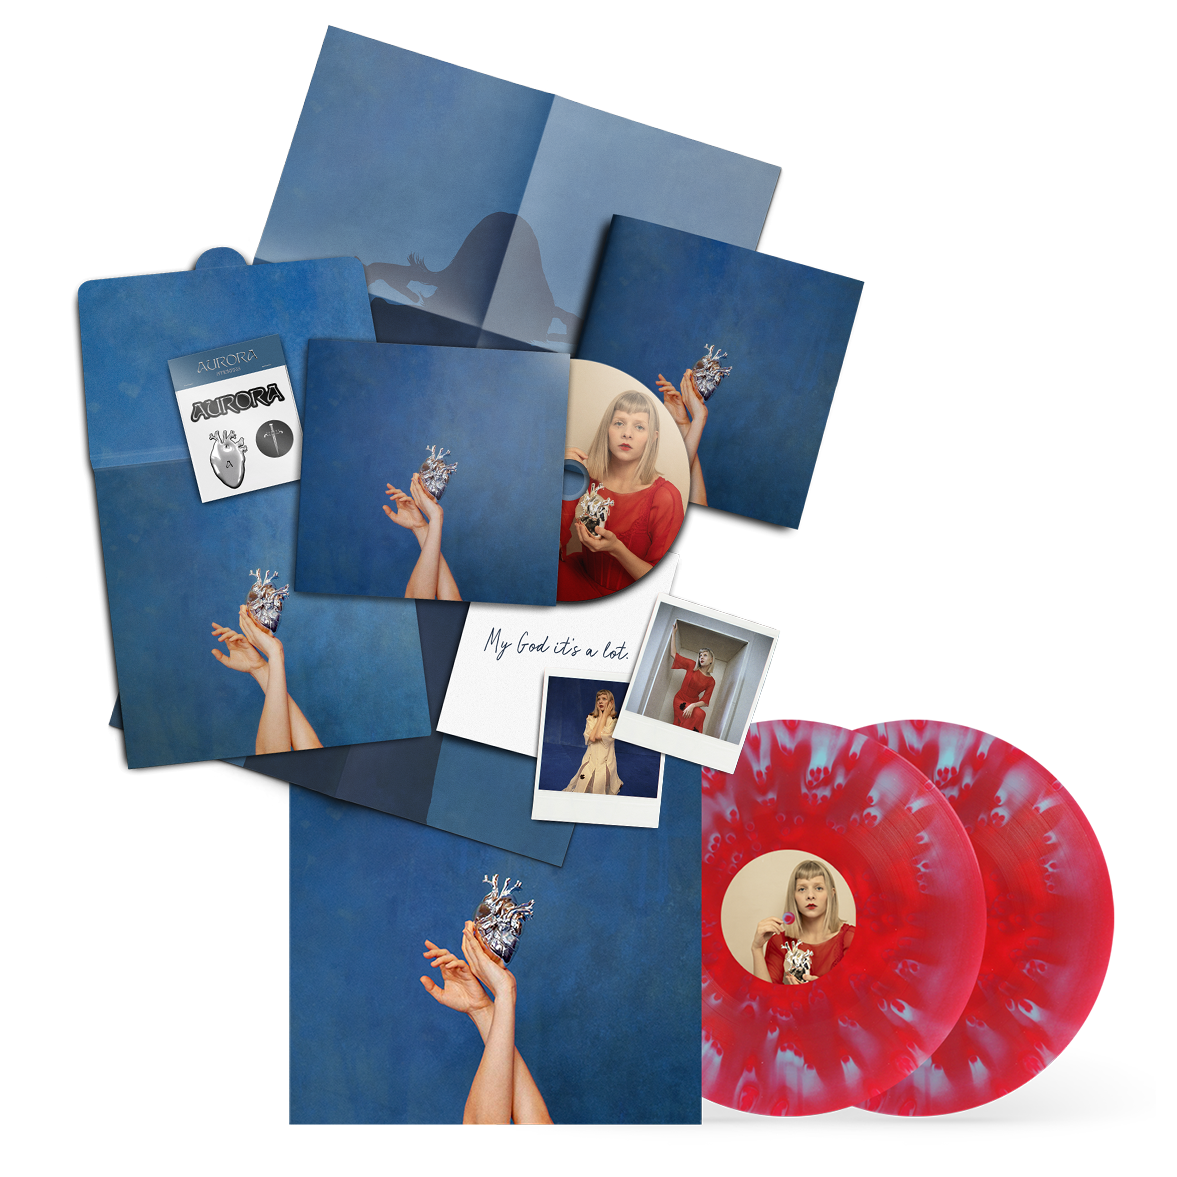 What Happened To The Heart? Exclusive Fanpack & Exclusive 2LP